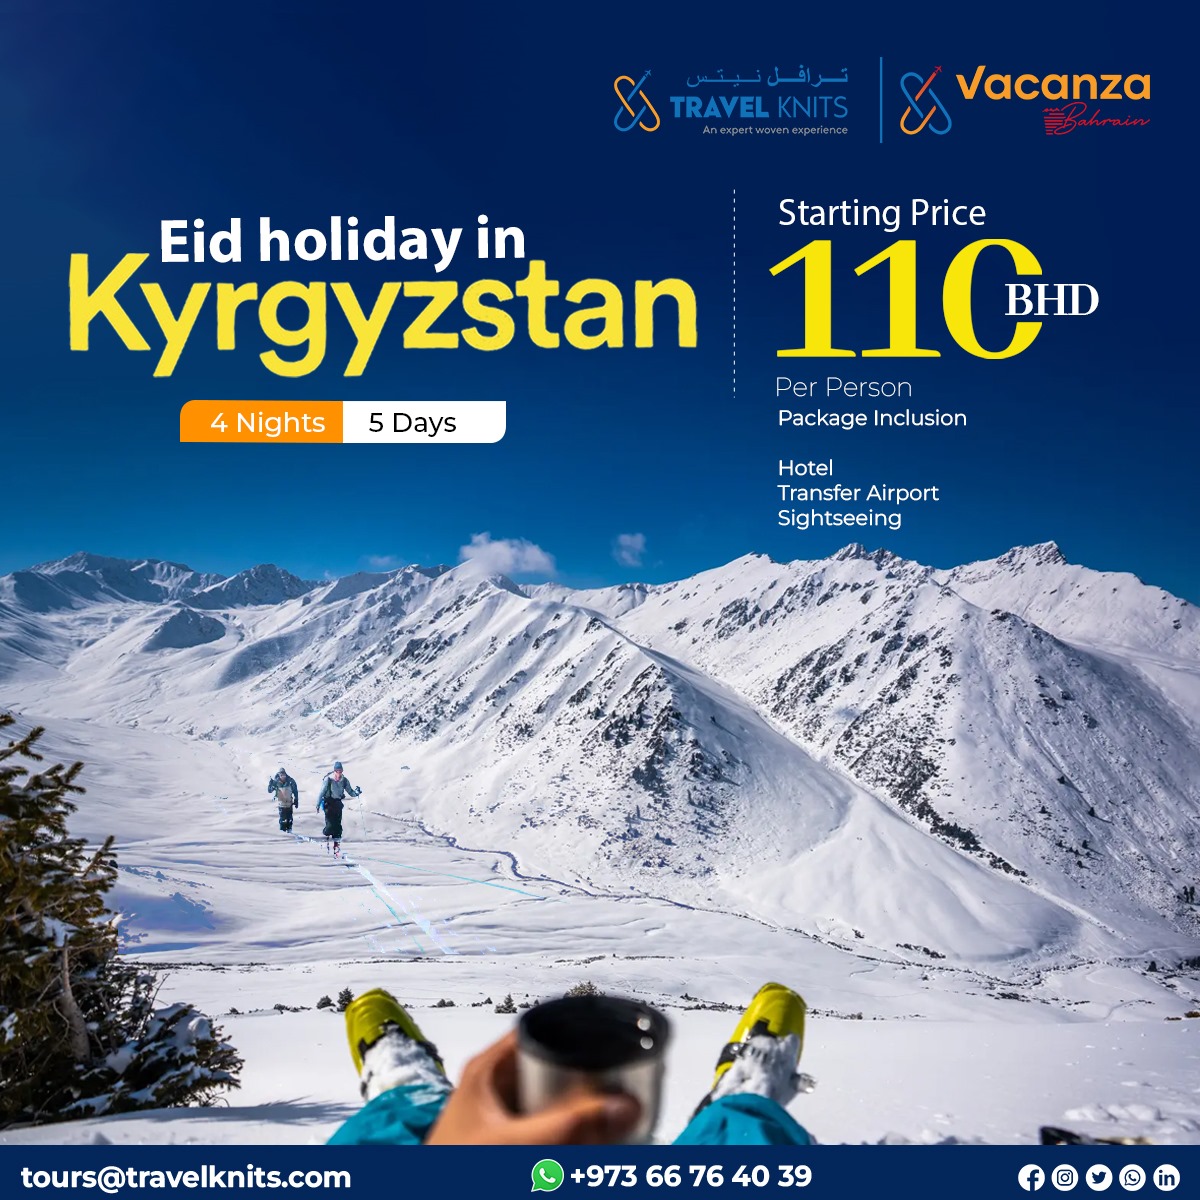 Eid holiday in kyrgyzstanTour Packages - Book honeymoon ,family,adventure tour packages to Eid holiday in kyrgyzstan|Travel Knits